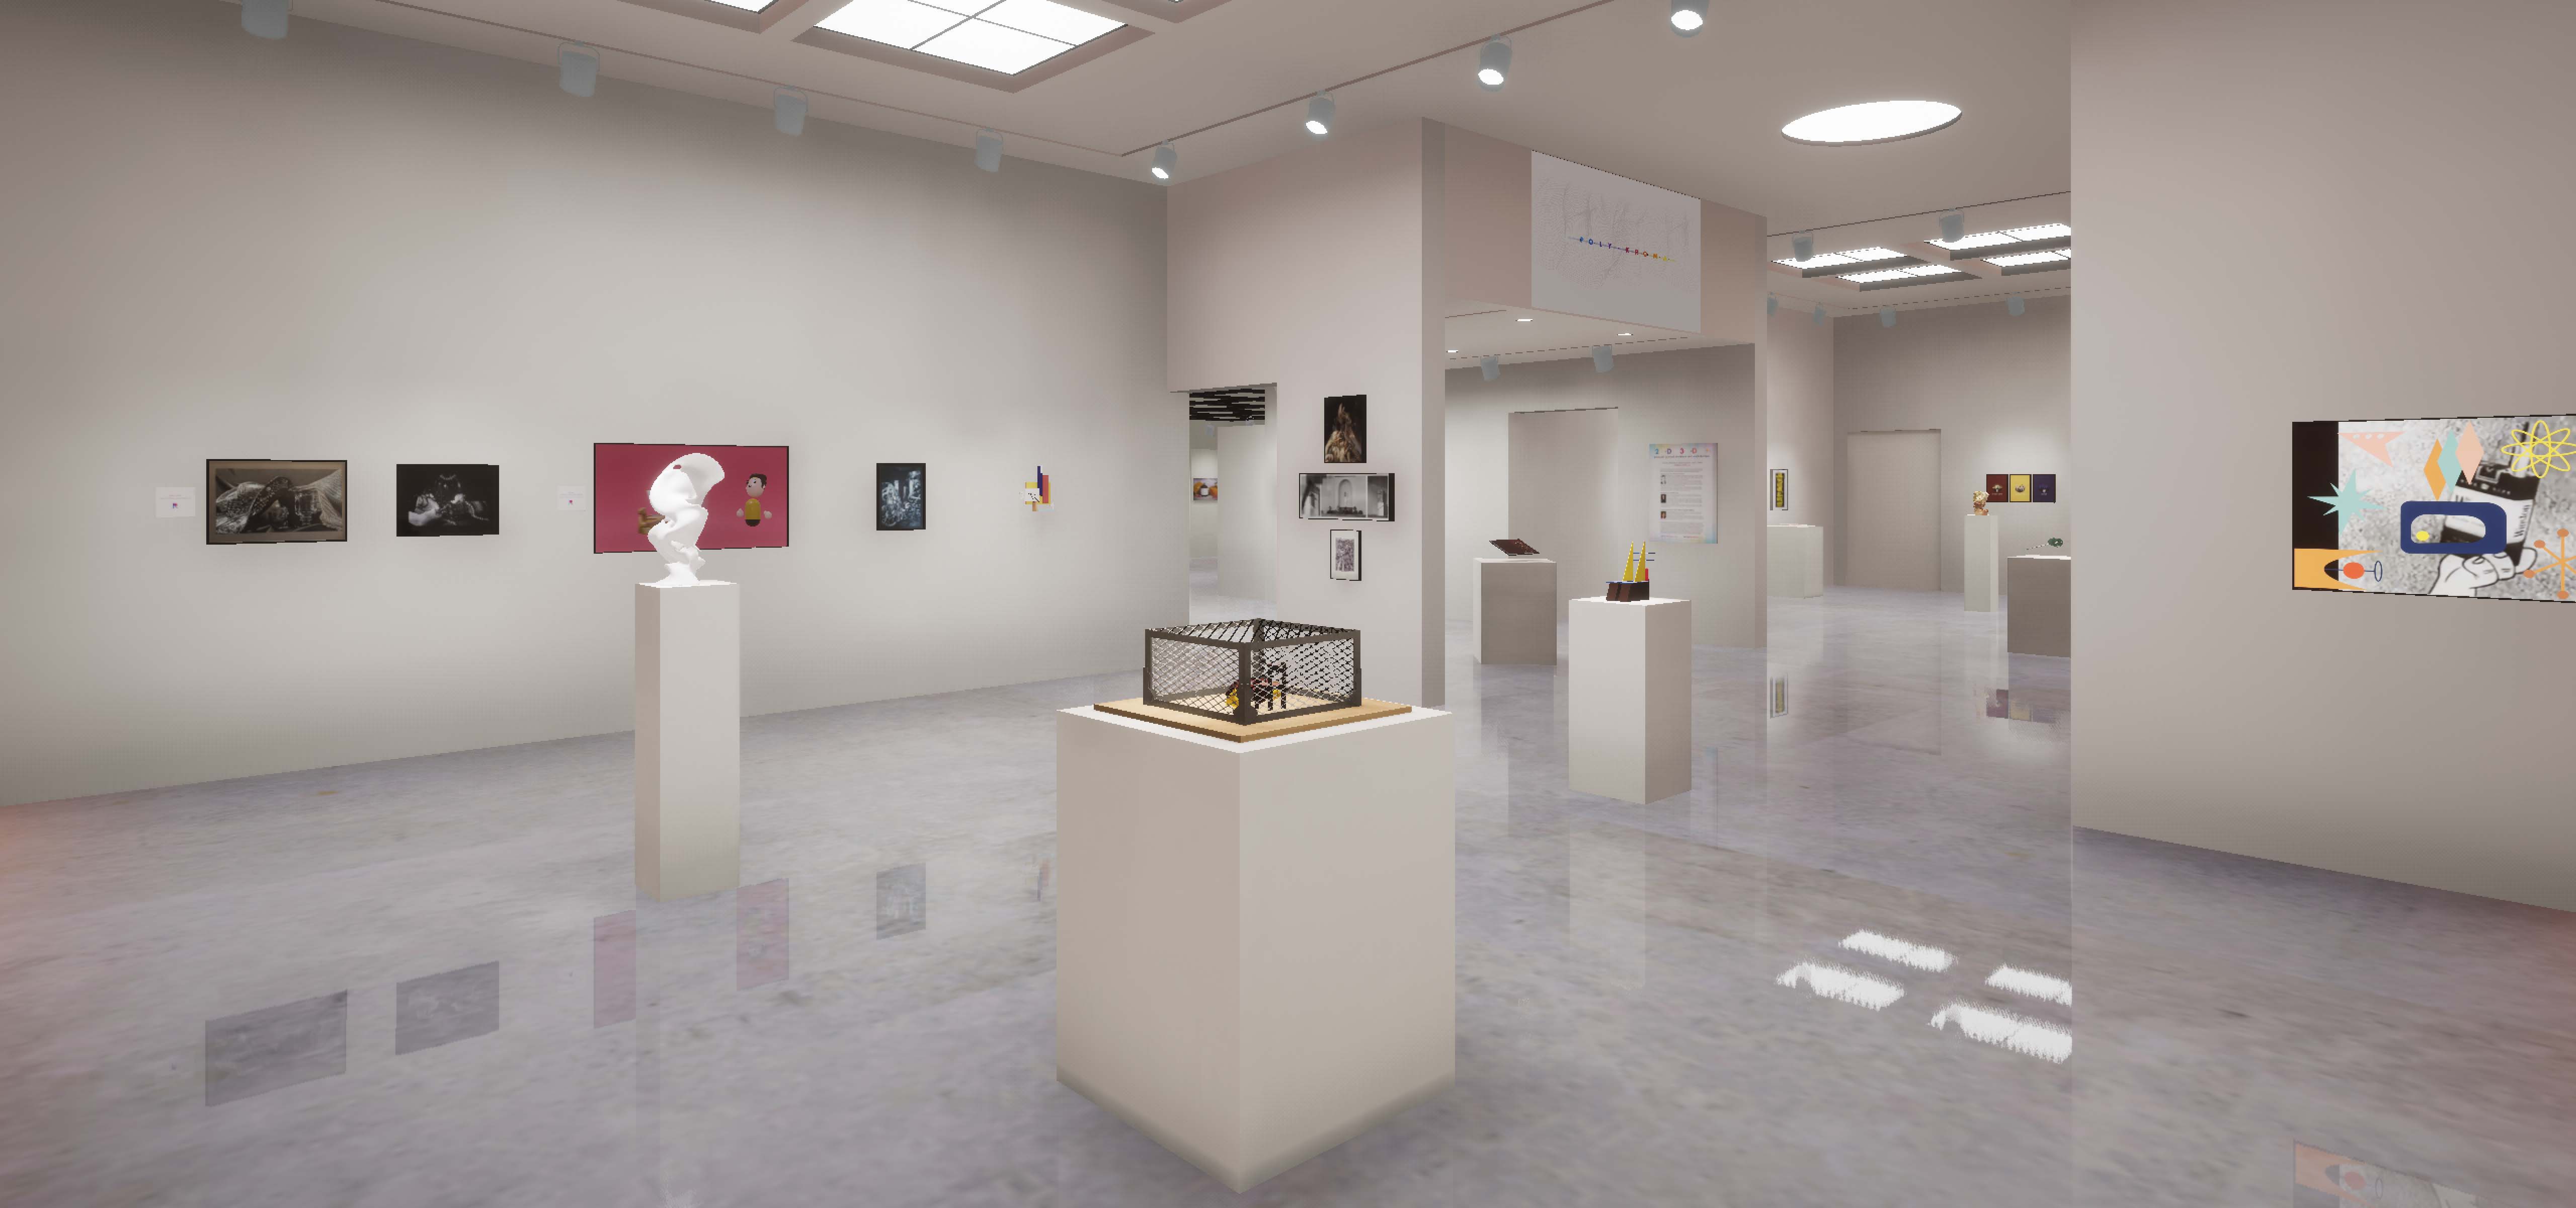 image of virtual gallery space with various sculptures on stands and 2d work mounted on the walls.